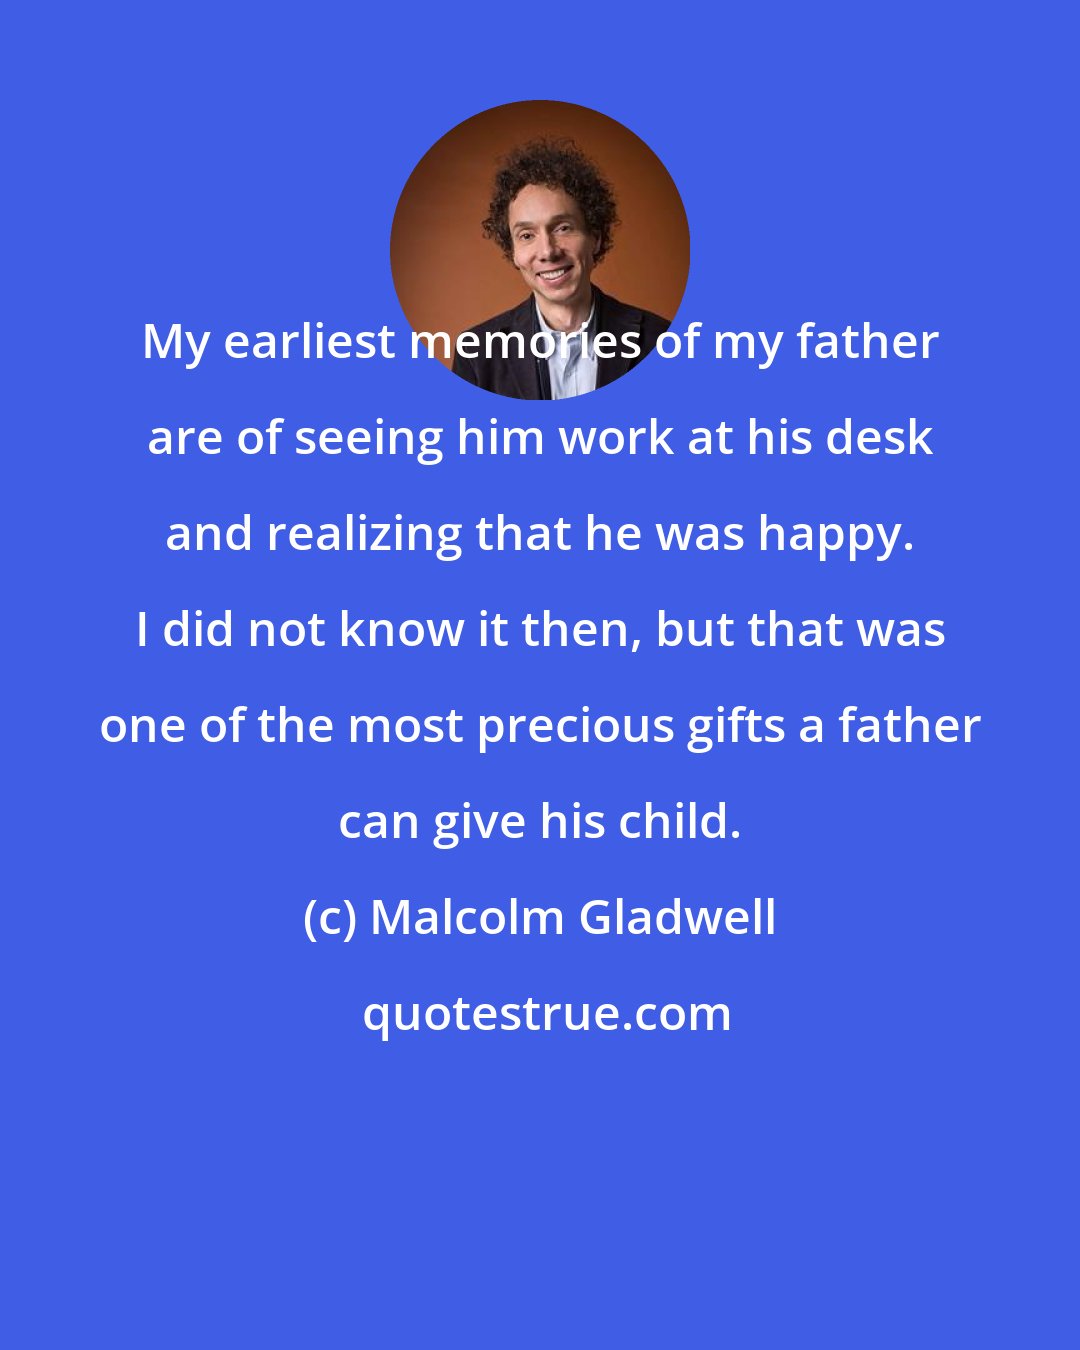 Malcolm Gladwell: My earliest memories of my father are of seeing him work at his desk and realizing that he was happy. I did not know it then, but that was one of the most precious gifts a father can give his child.